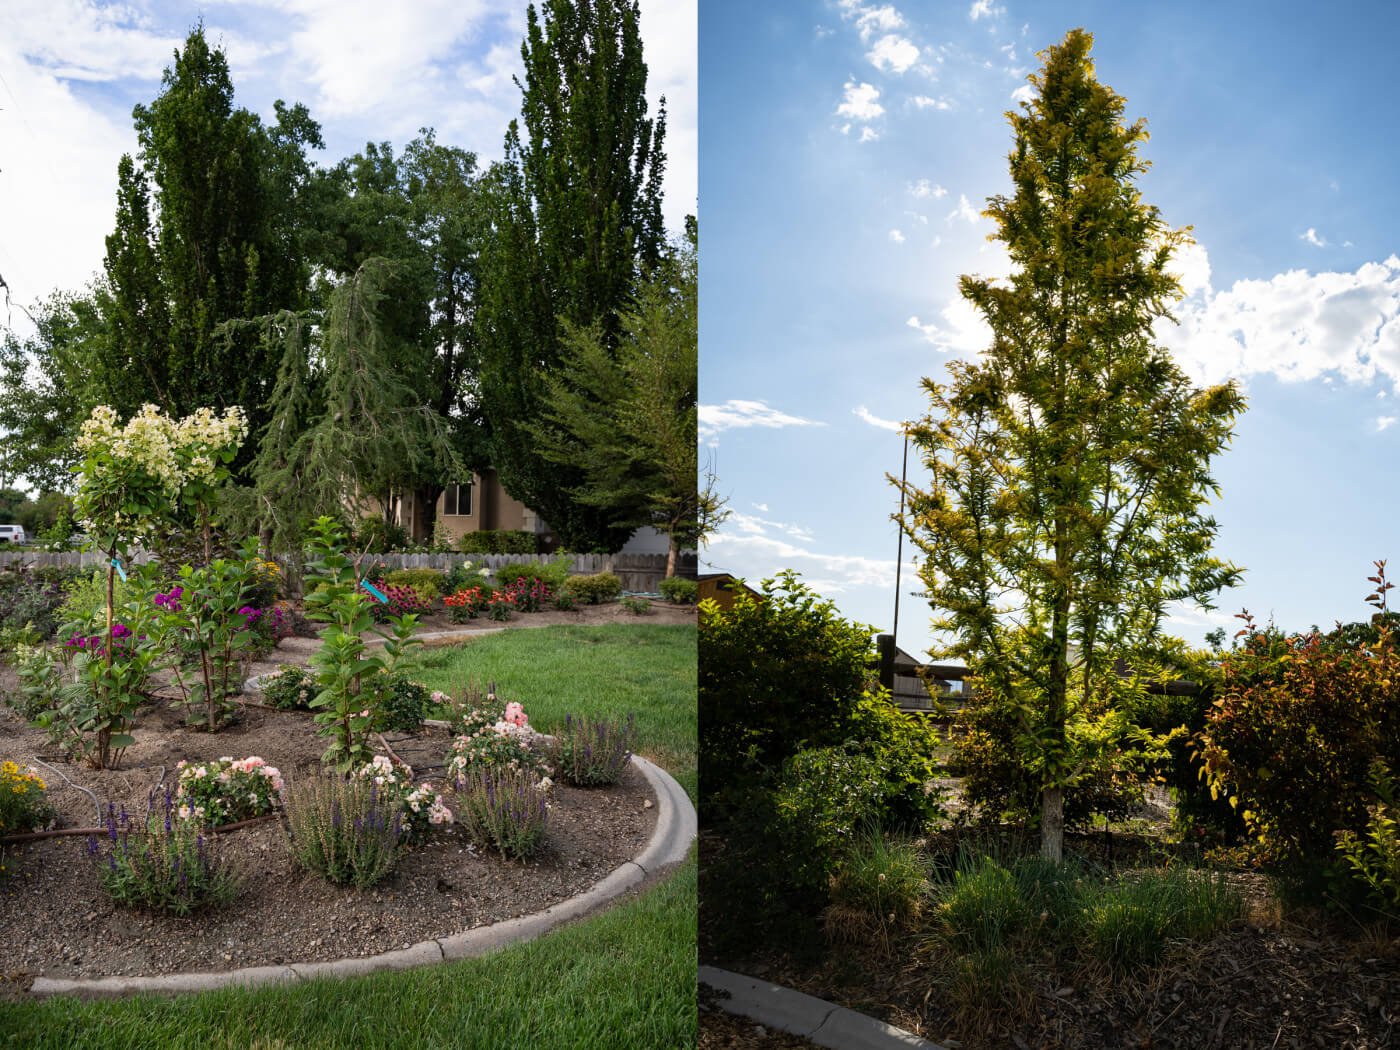 Using trees in your landscape design